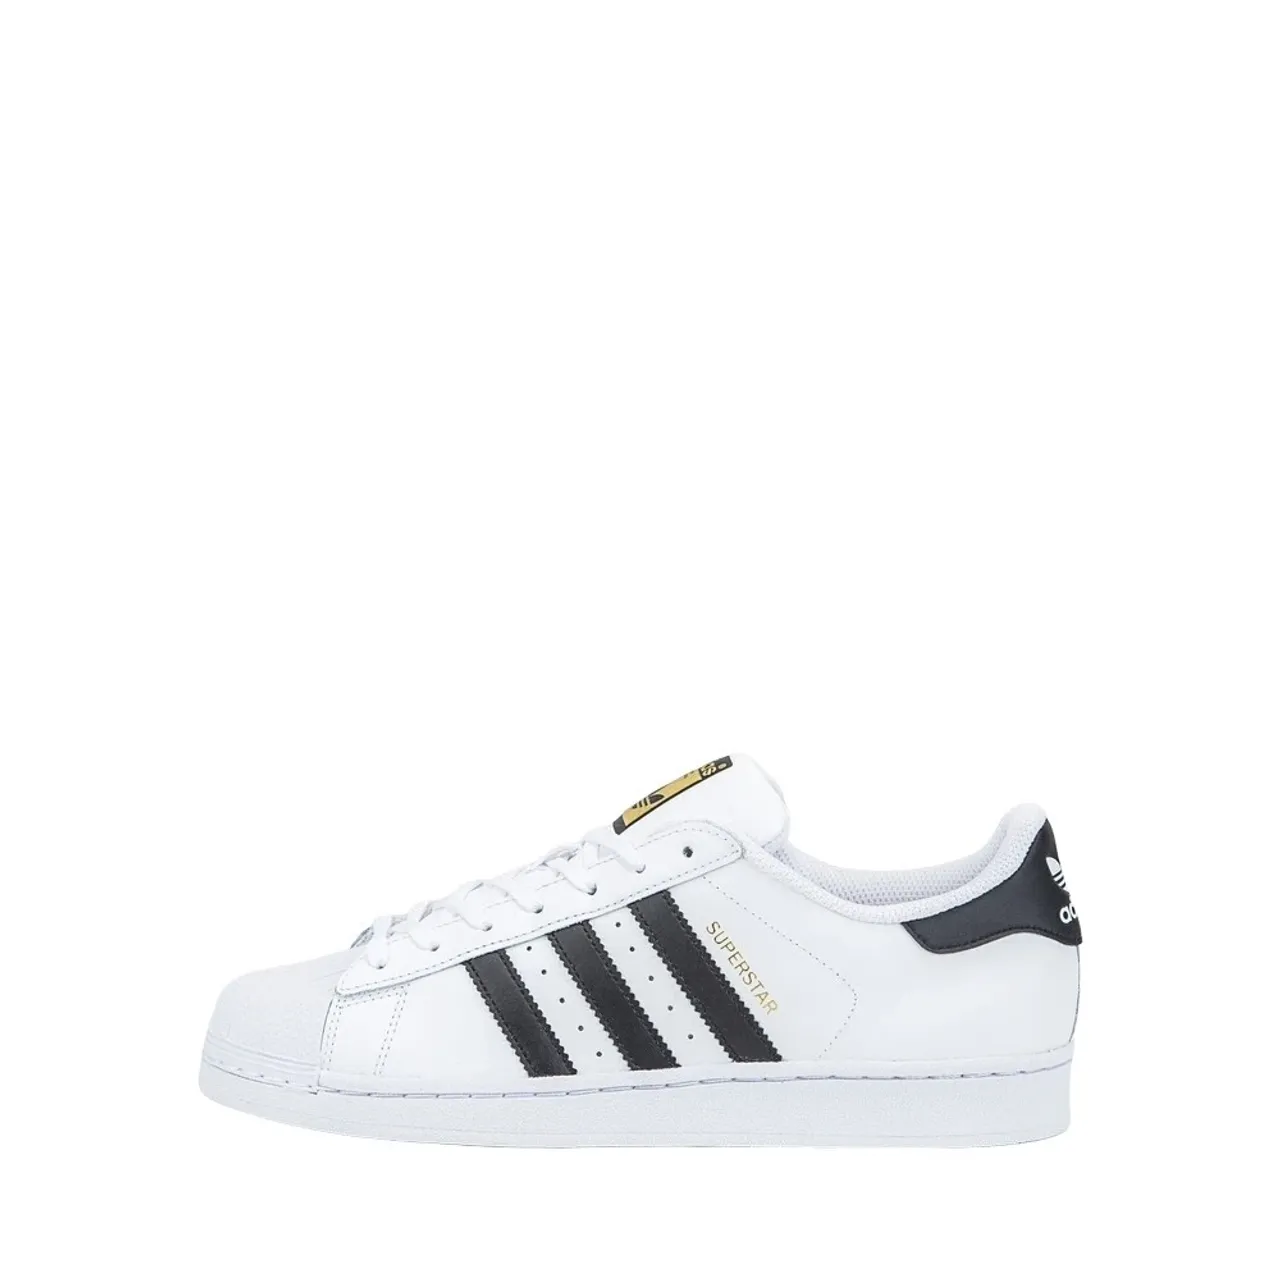 Adidas , Superstar Sneakers ,White male, Sizes: 10 UK, 9 1/3 UK, 4 2/3 UK, 13 1/3 UK, 2 2/3 UK, 14 UK, 2 UK, 35 EU, 6 UK, 12 2/3 UK, 12 UK, 1 1/2 UK